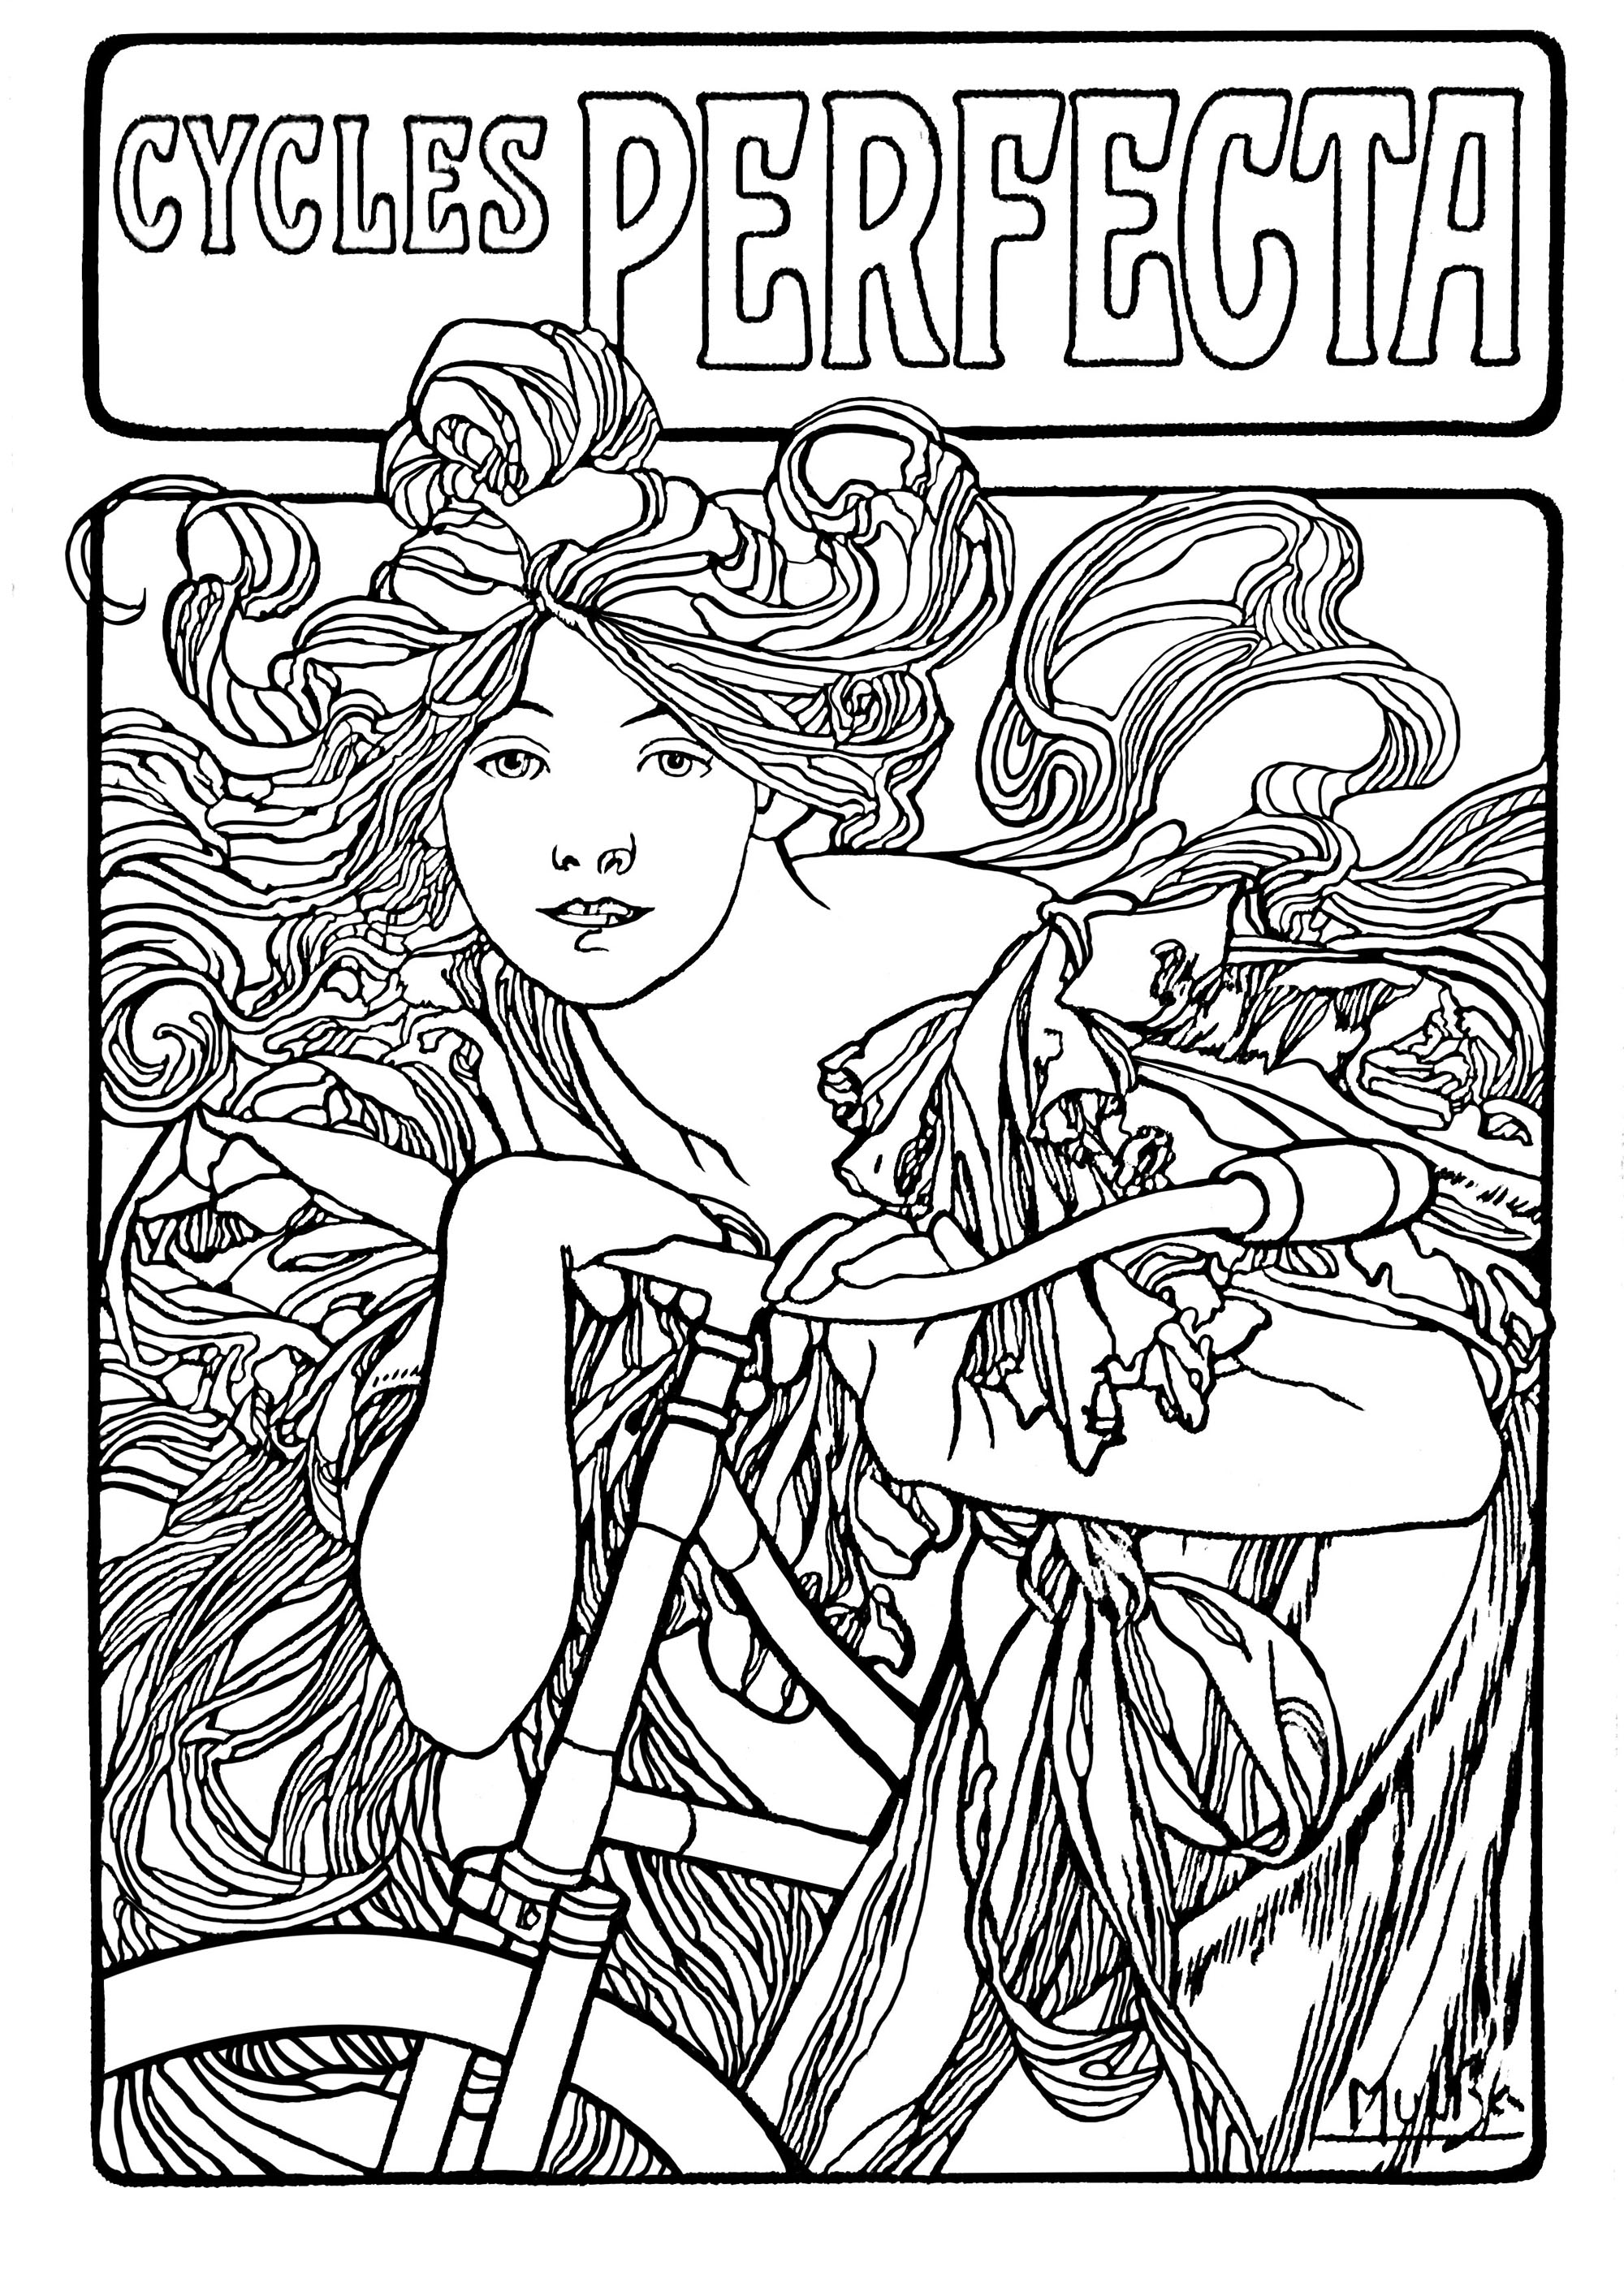 Coloring page created from a poster by Alfons Mucha for the British company Cycles Perfecta (1902)